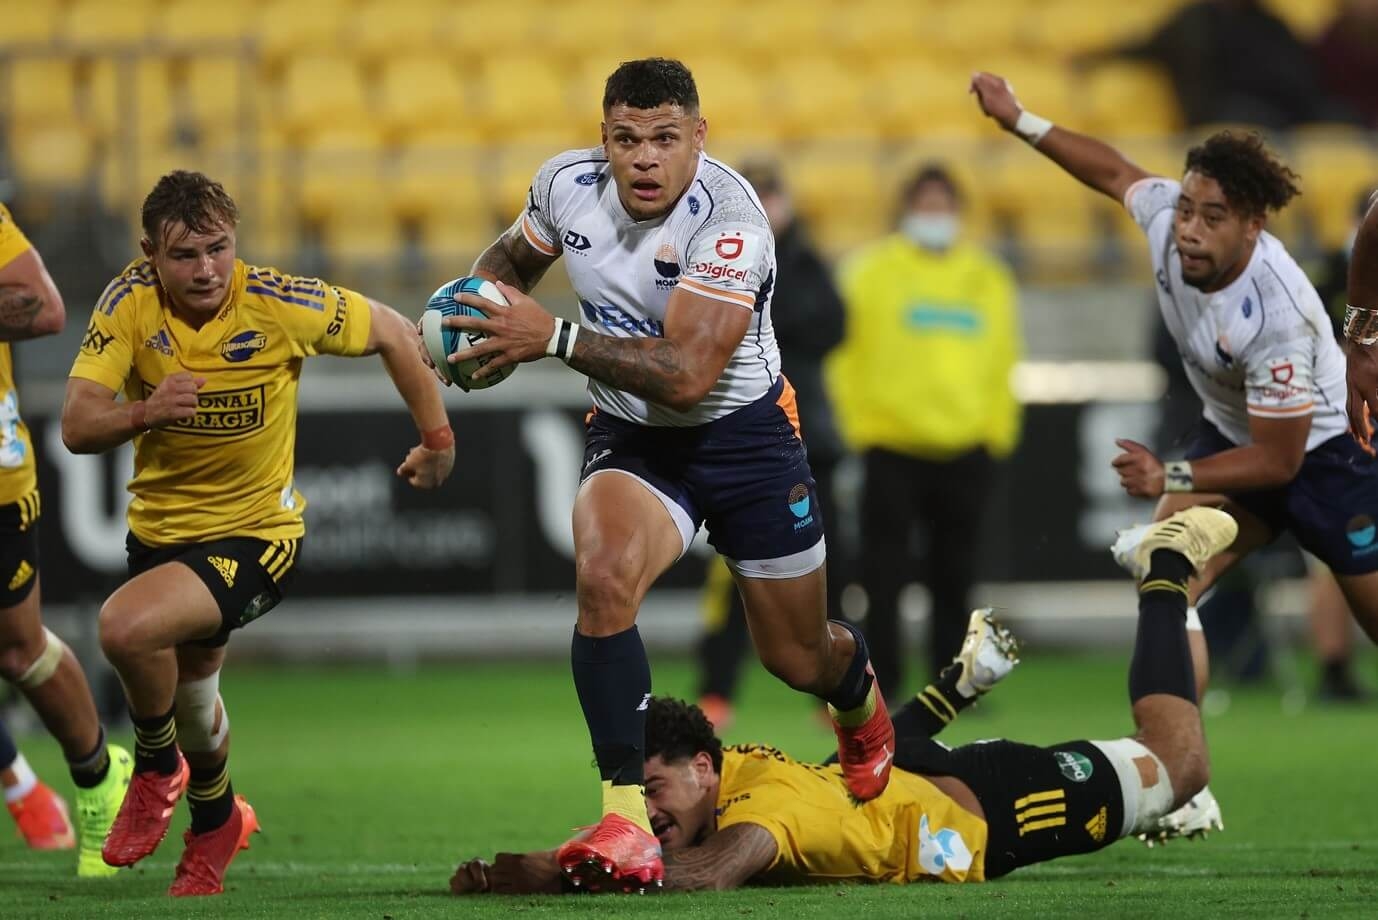 A Moana Pasifika Rugby player running with the ball